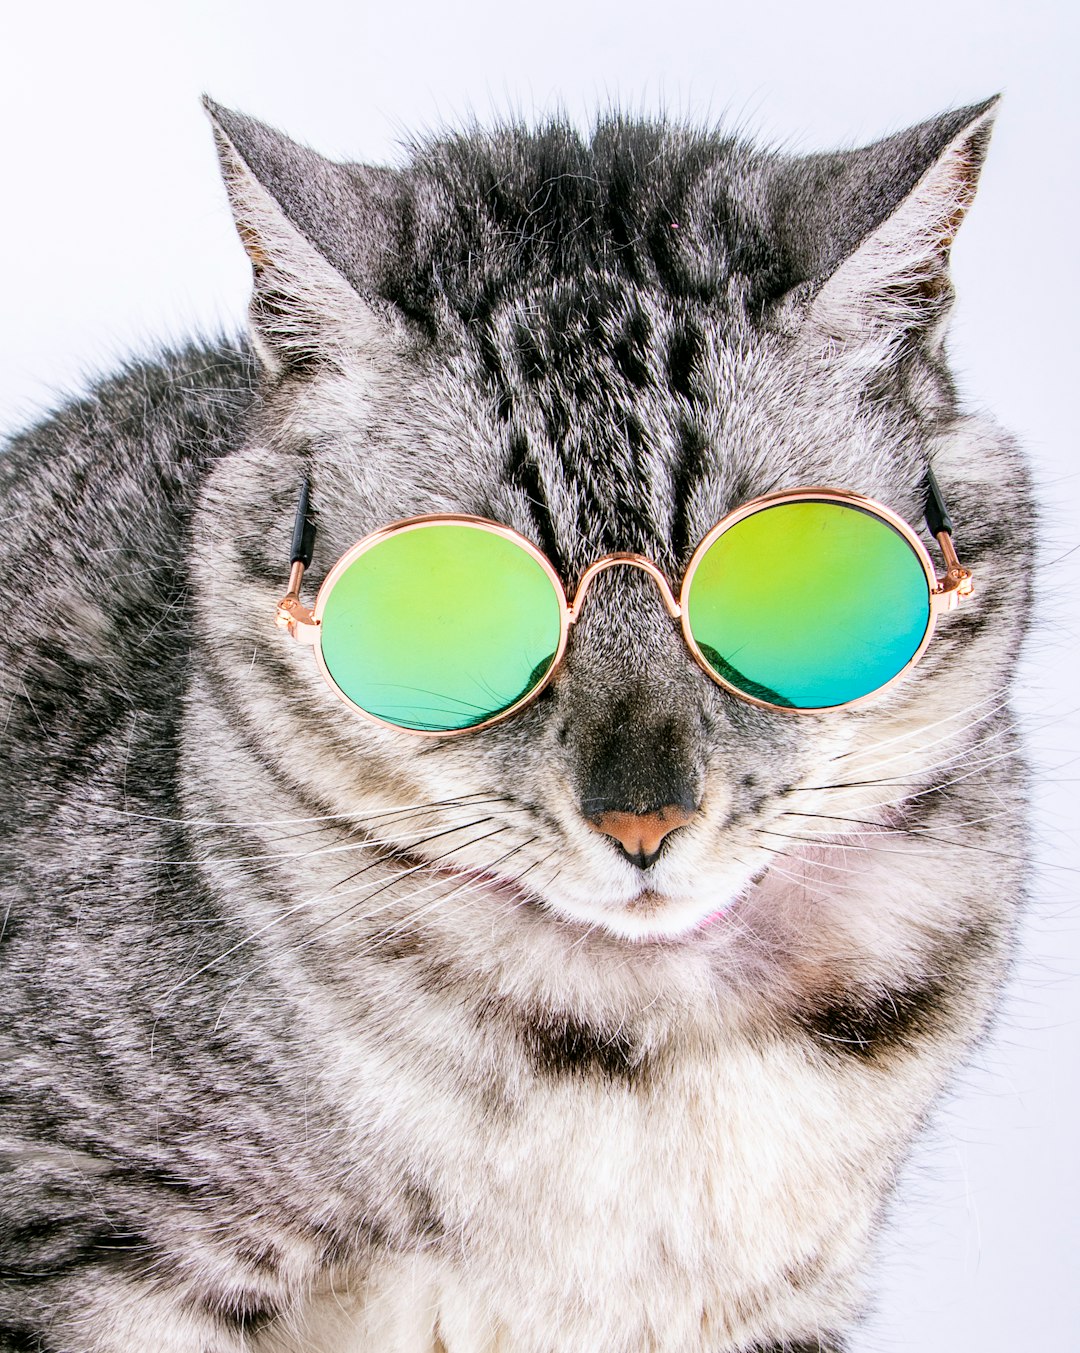 a cat wearing sunglasses and looking at the camera